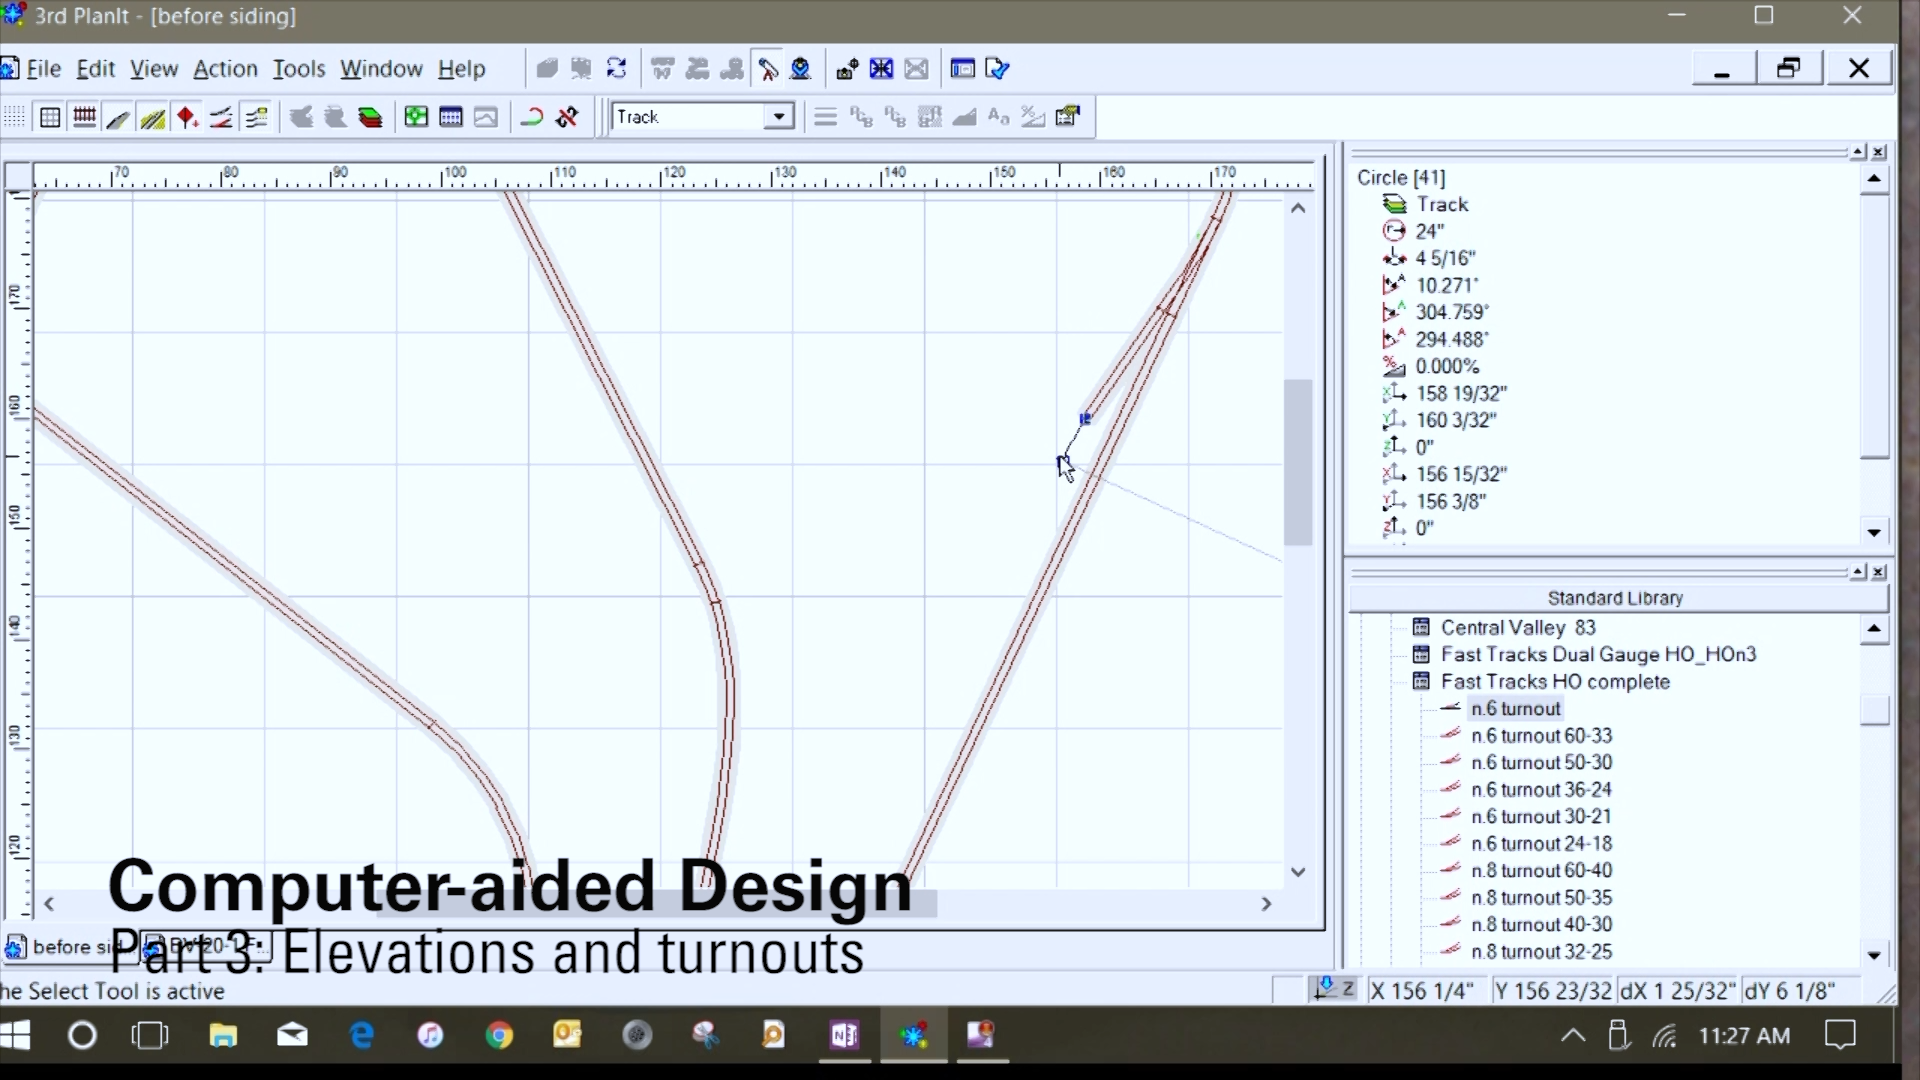 How-to Library: Track Planning Made Easy – Computer-aided design, Part 3 Elevations and turnouts